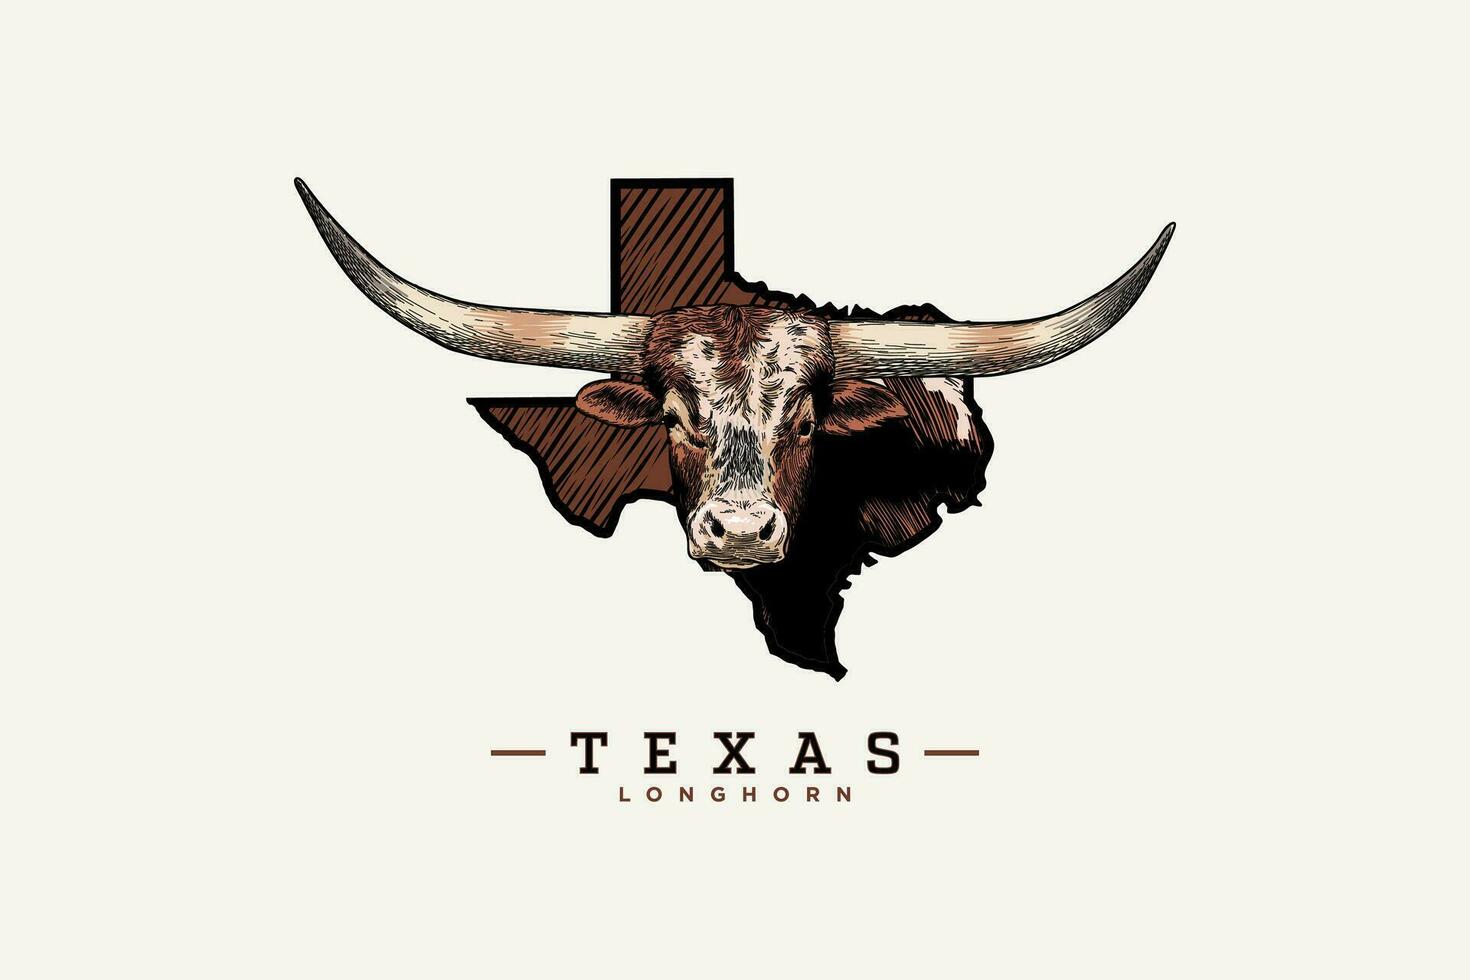 Texas longhorn color illustration with map vector